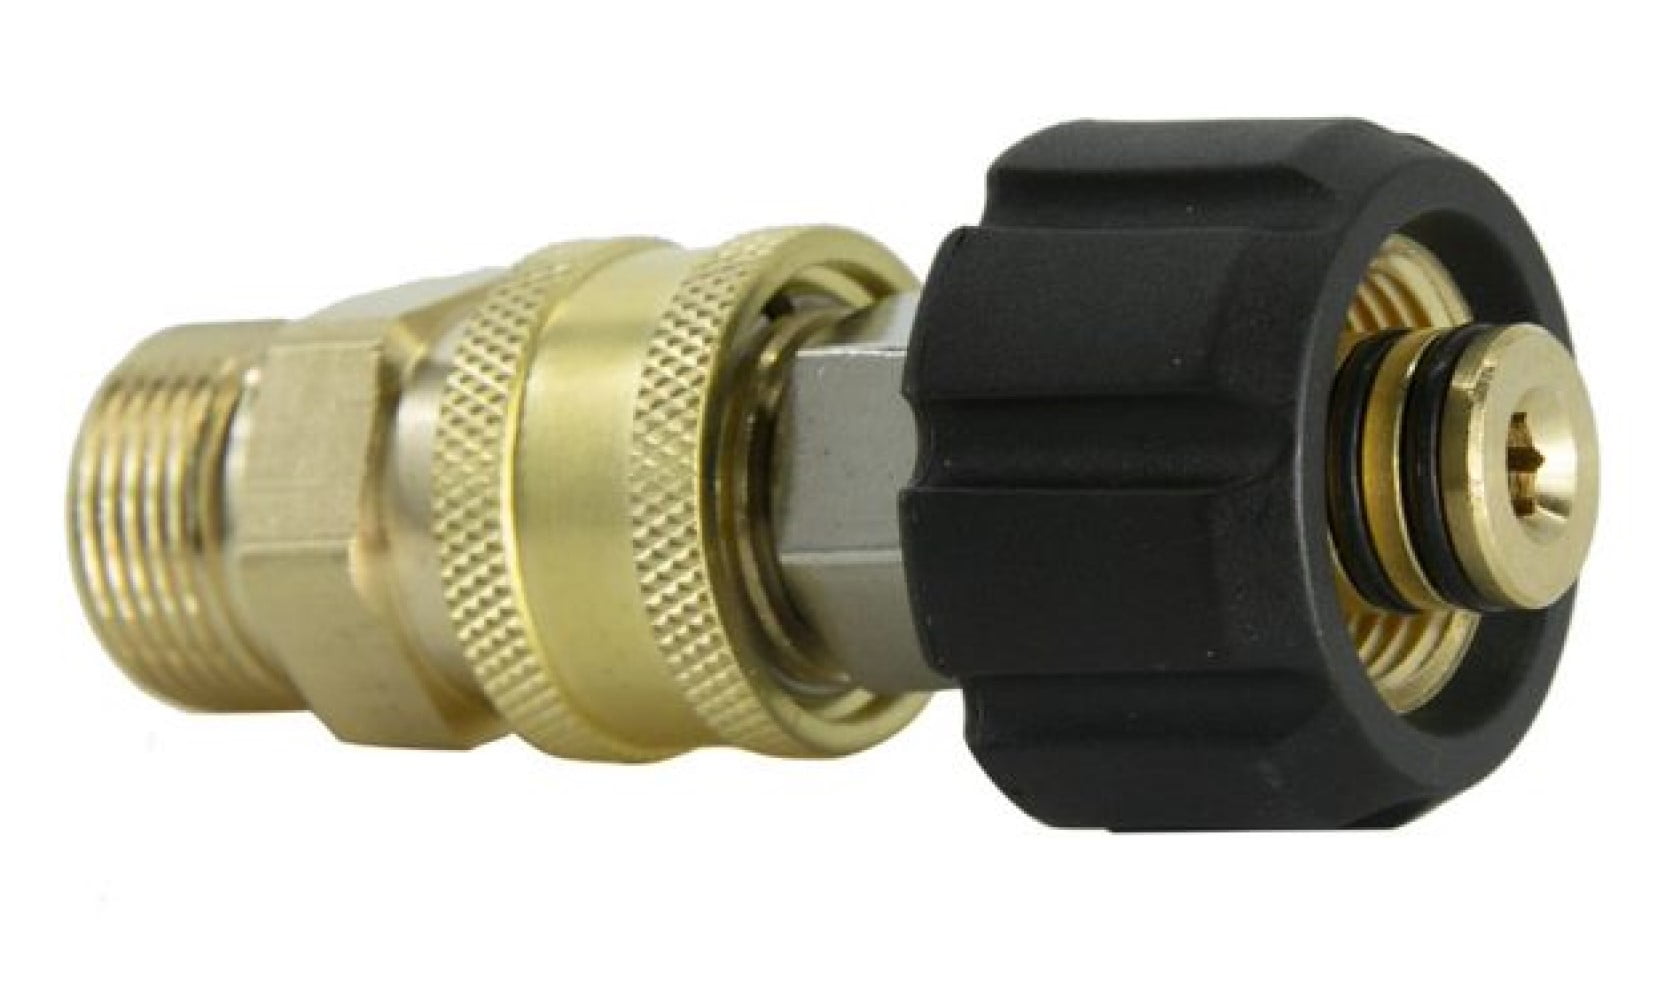 3/8" Quick Coupler Fittings for Pressure Washer Hose-New Top Quality 